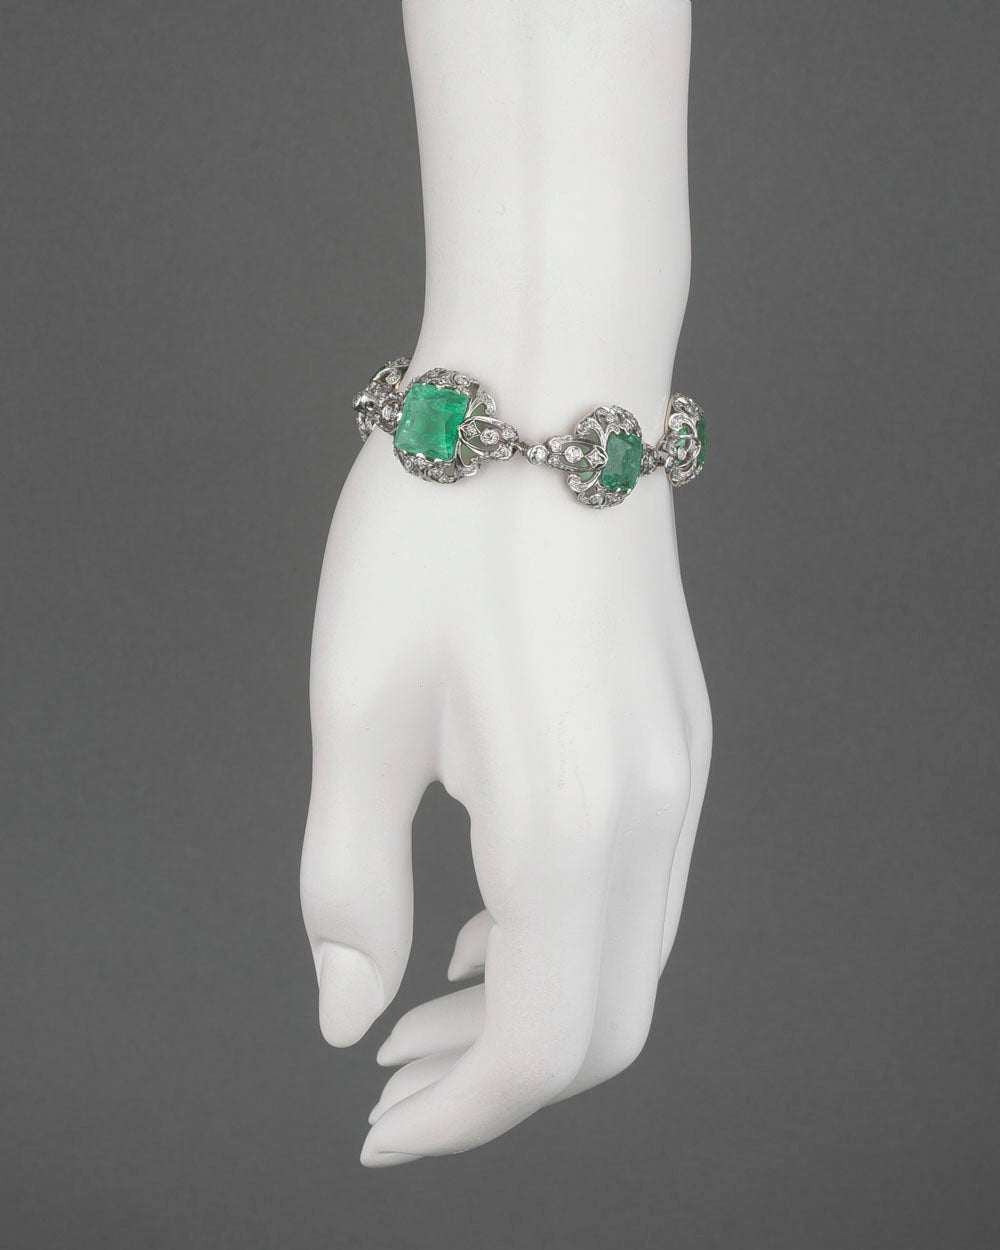 Antique emerald and diamond bracelet, set with six cushion-shaped emeralds of graduated size, the emeralds weighing approximately 20.37 total carats, accented by circular-cut diamonds weighing approximately 3.95 total carats, in a fine, pierced